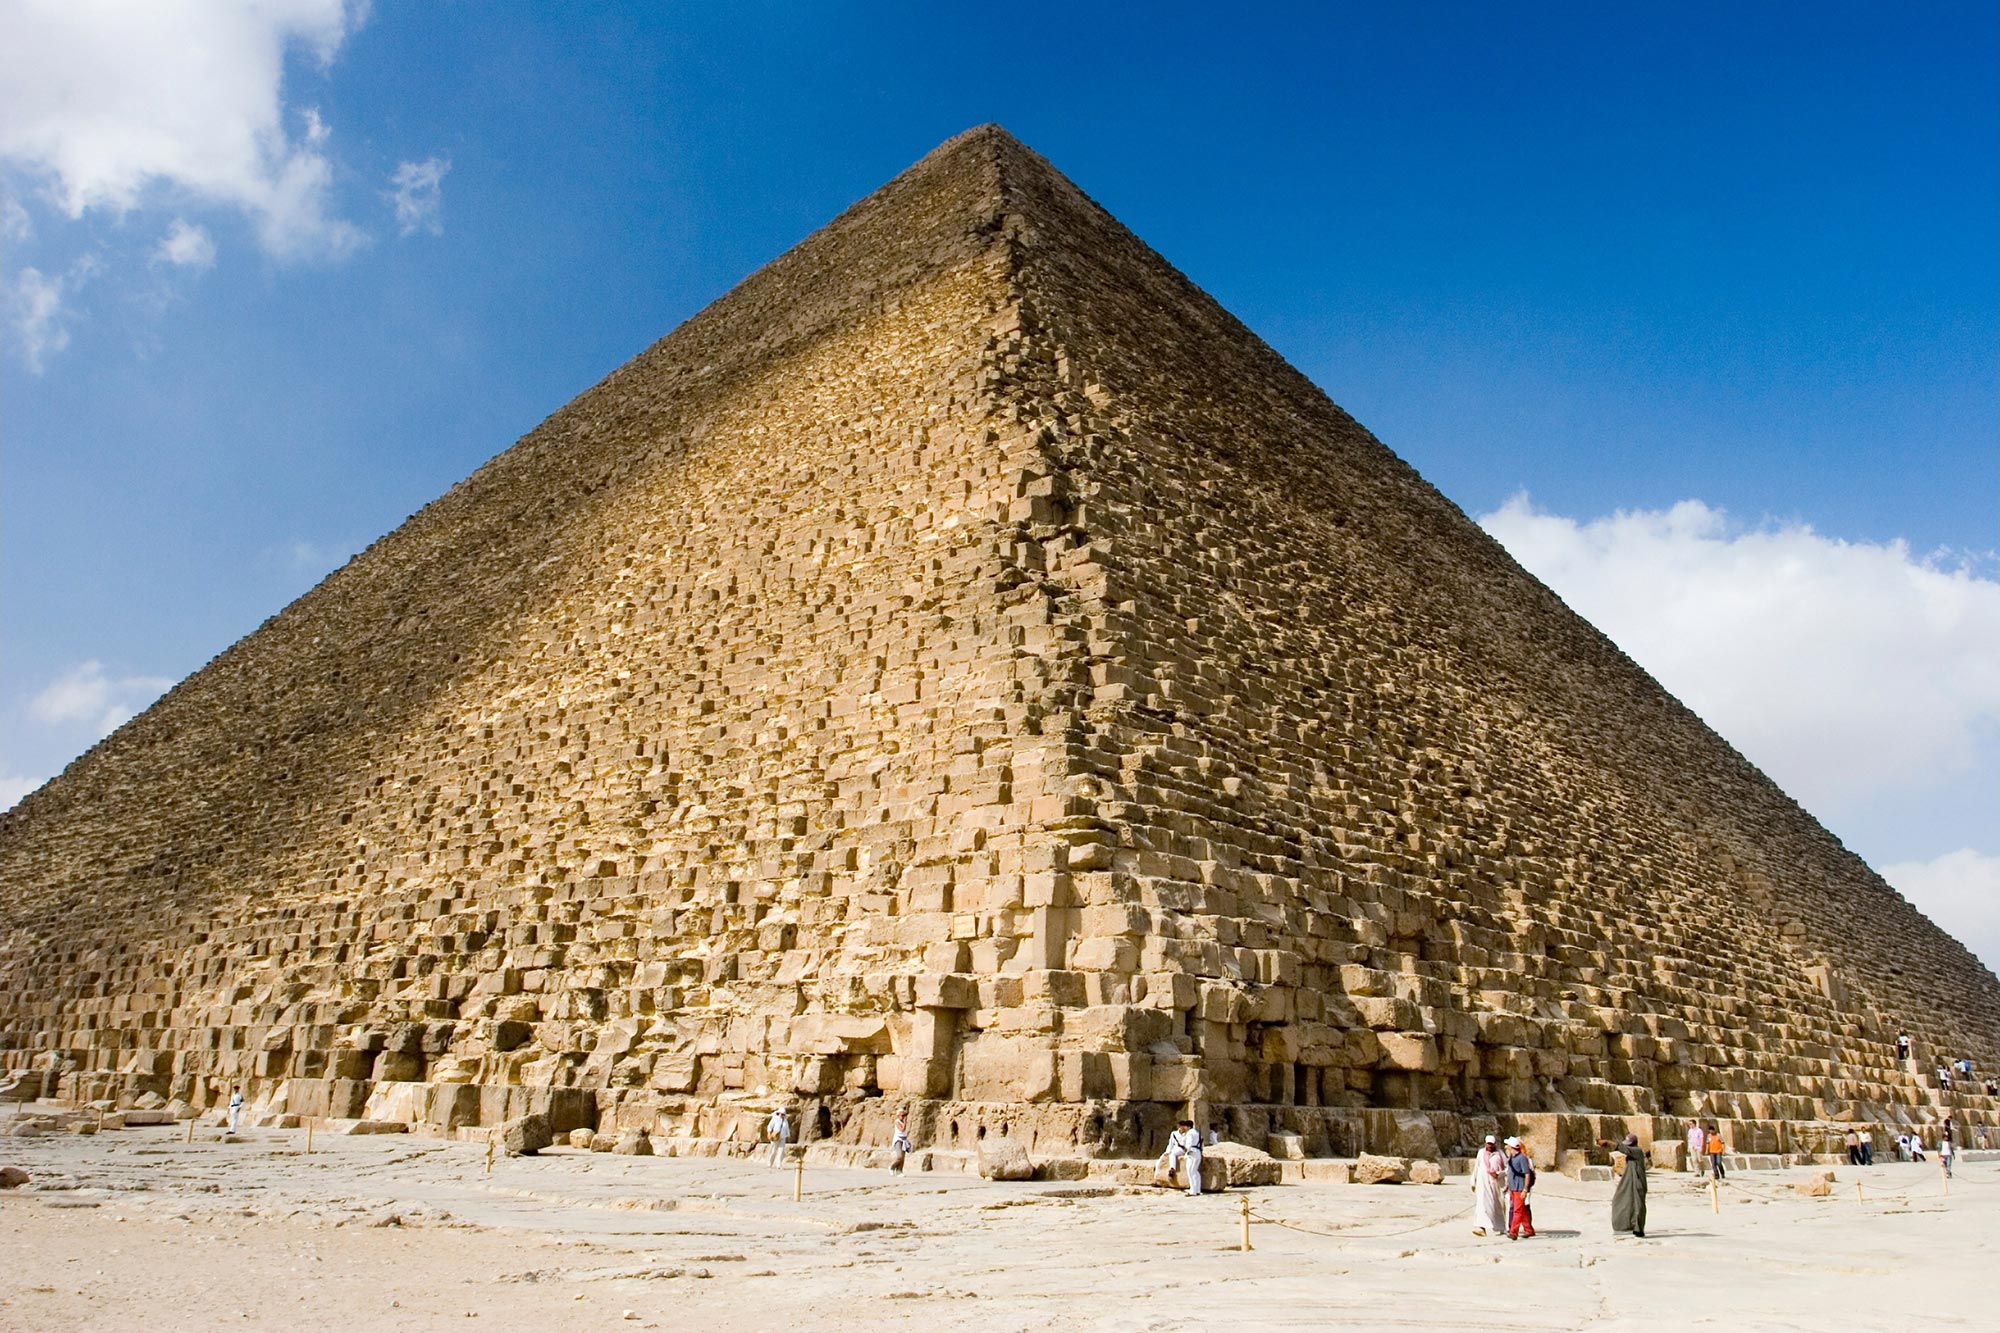 Archeologists Are Planning To Scan the Great Pyramid Giza With Rays – They Should See Every Hidden Chamber